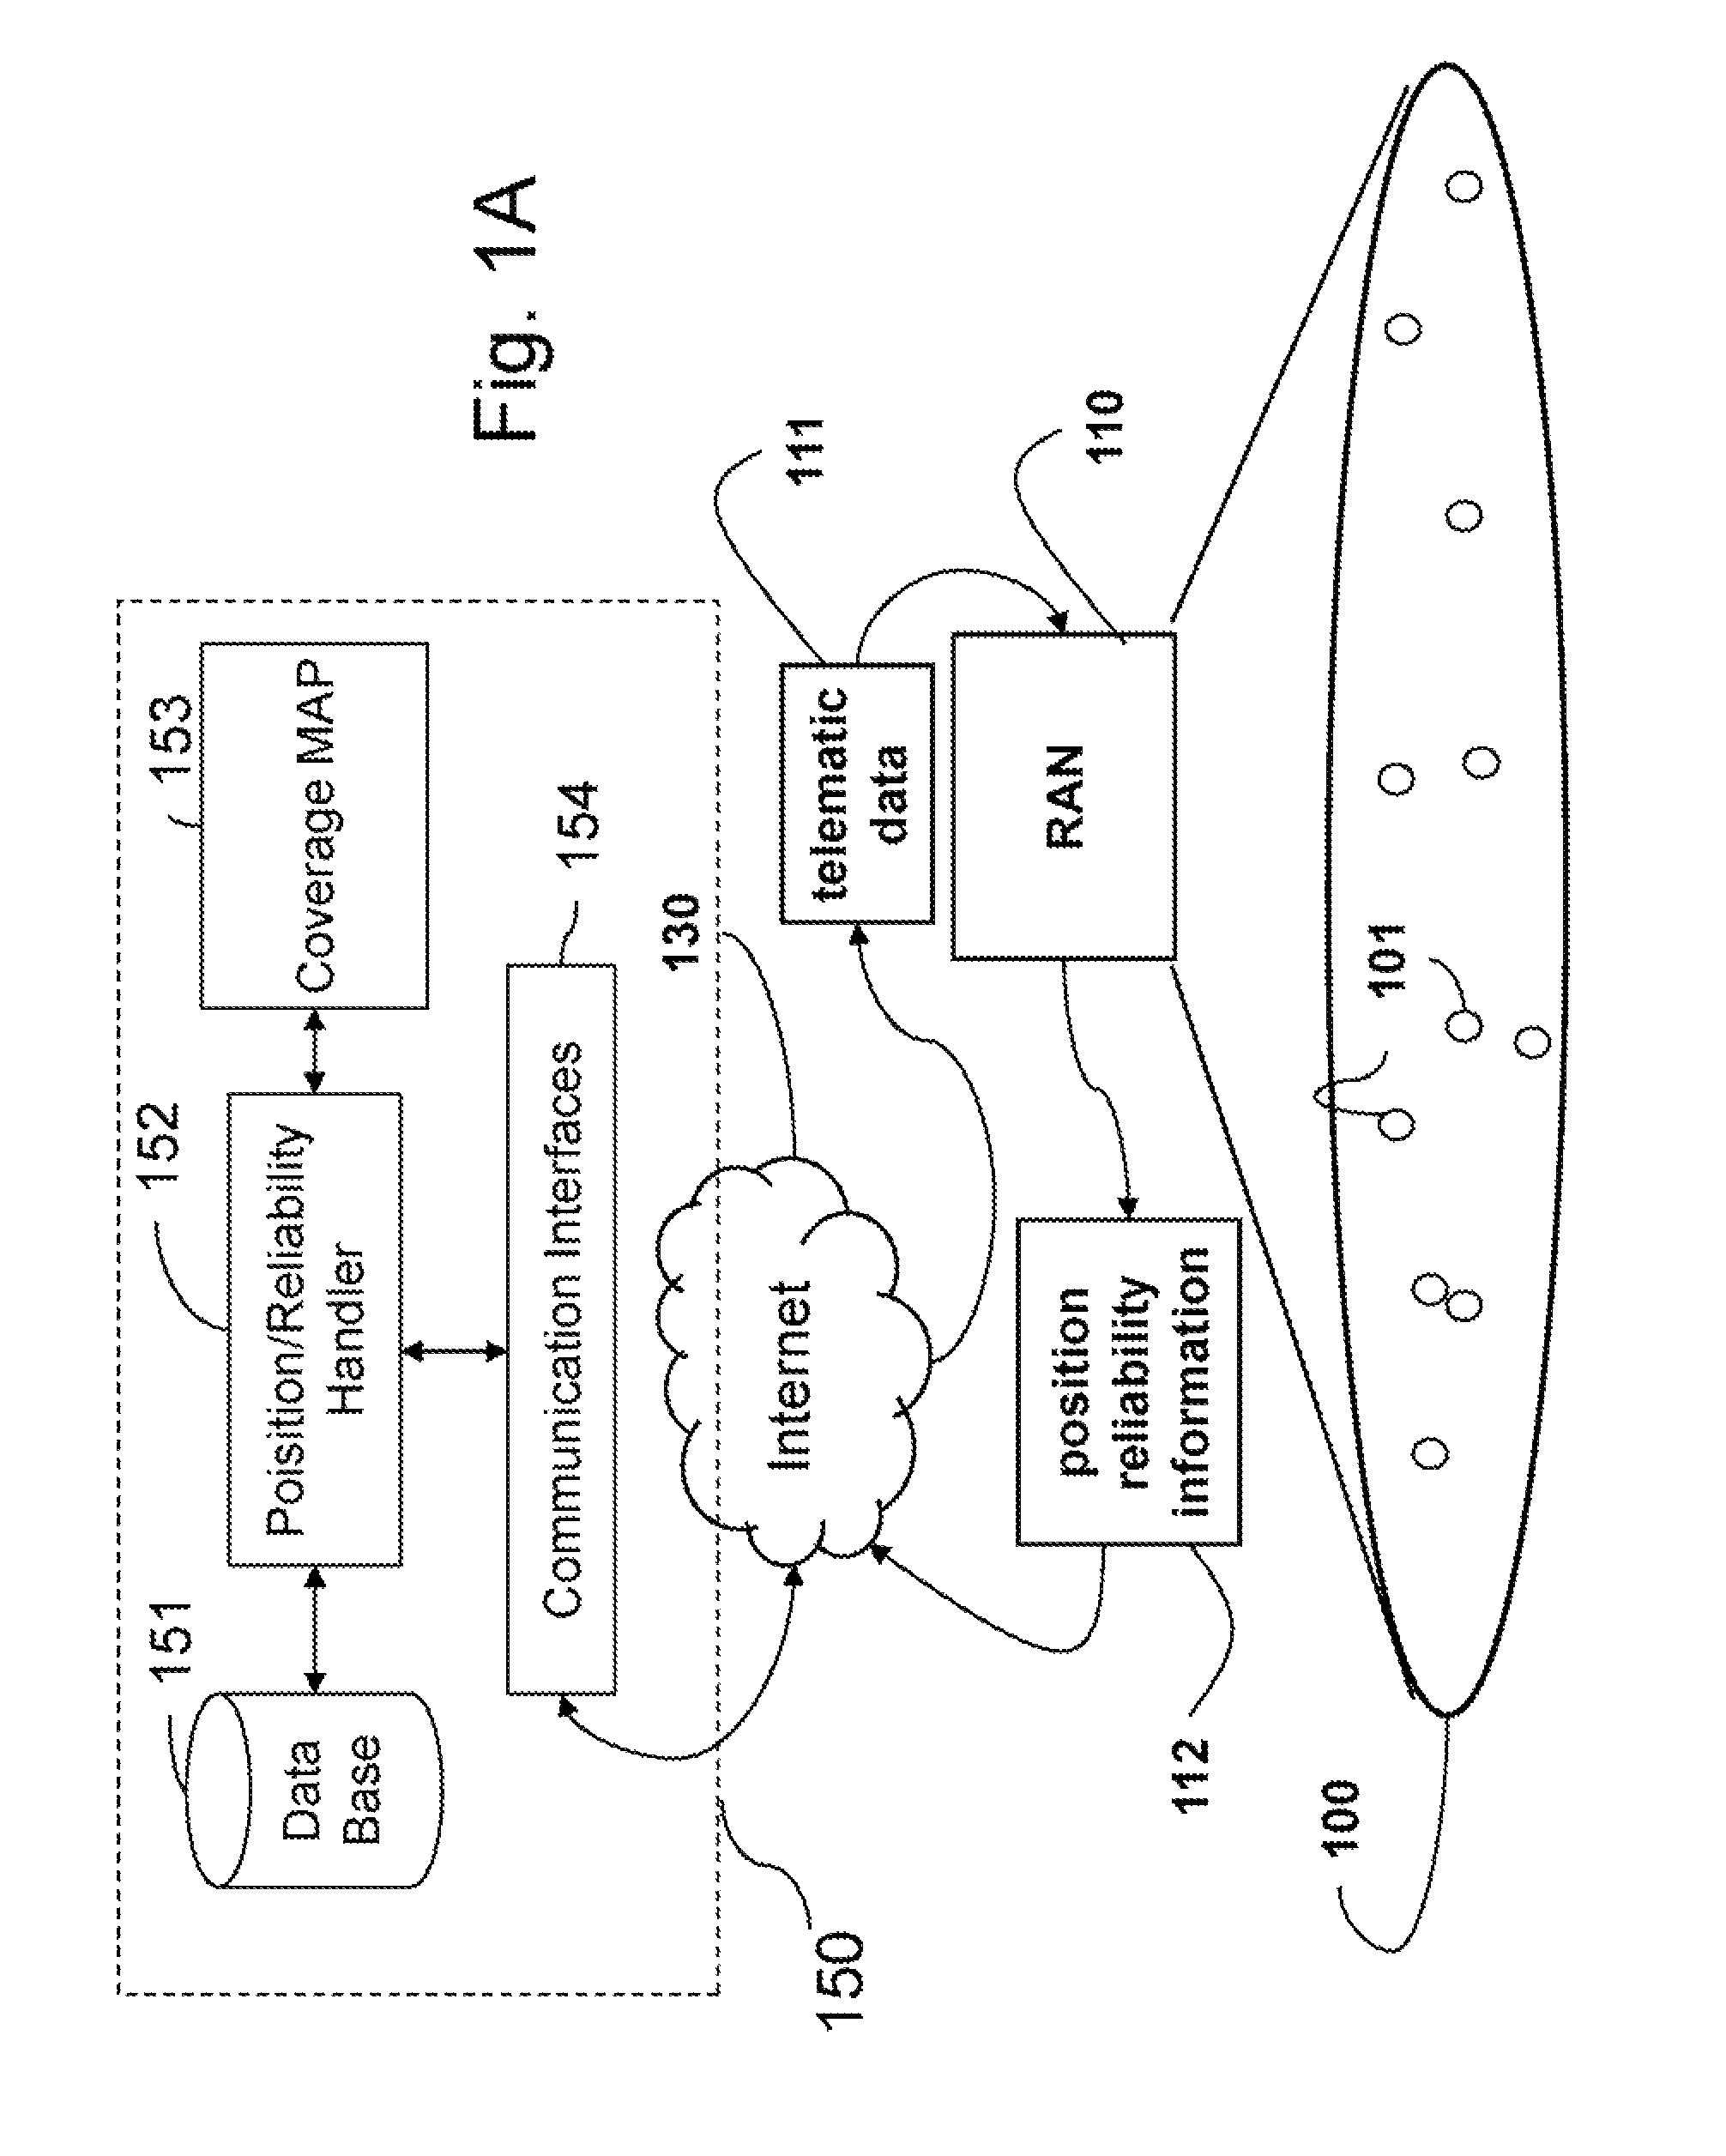 Method for generating coverage maps for wireless networks with mobile devices